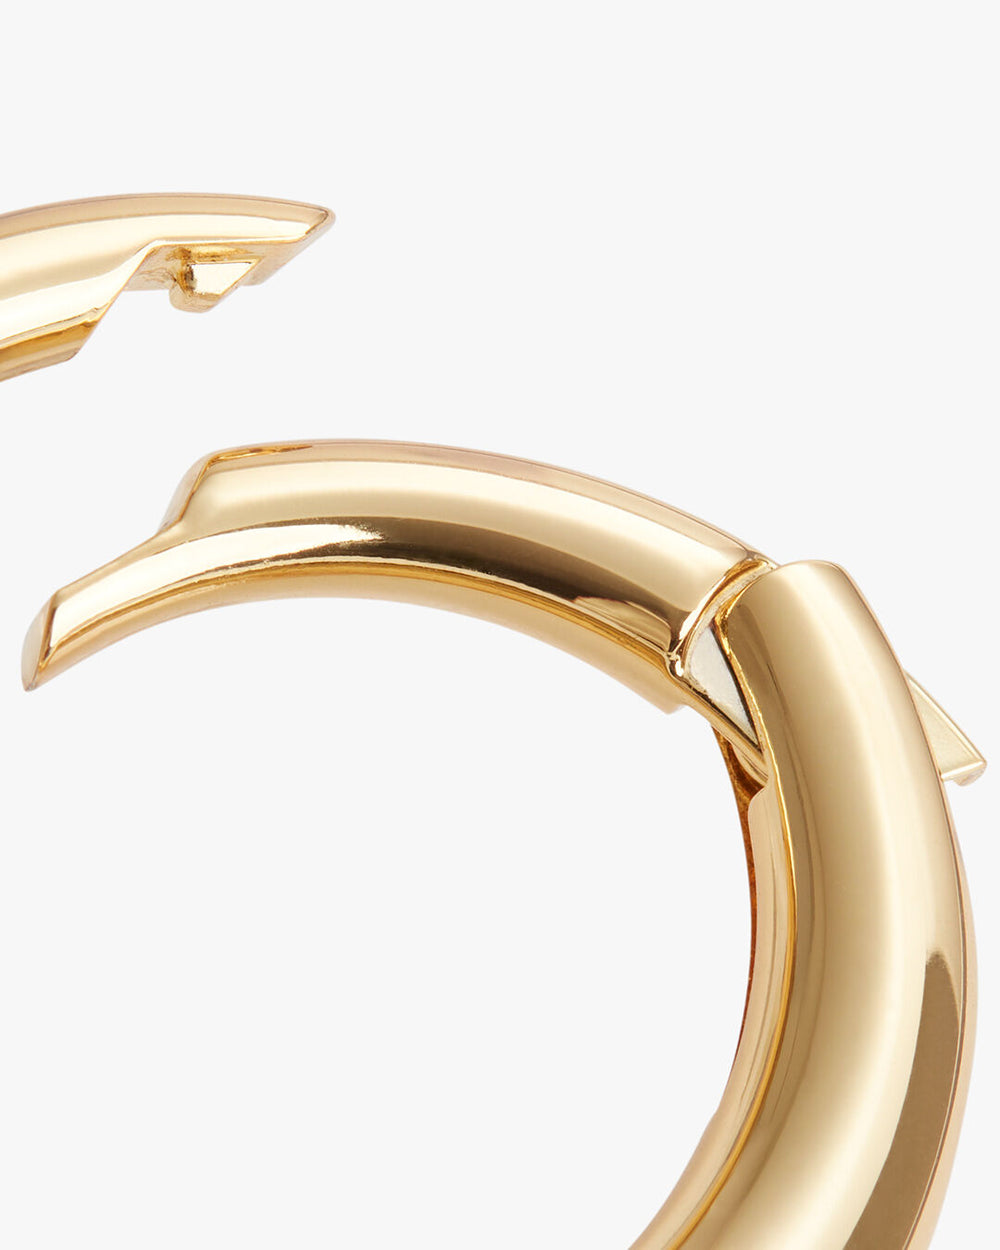 Two hoop earrings shown with one leaning on the other.